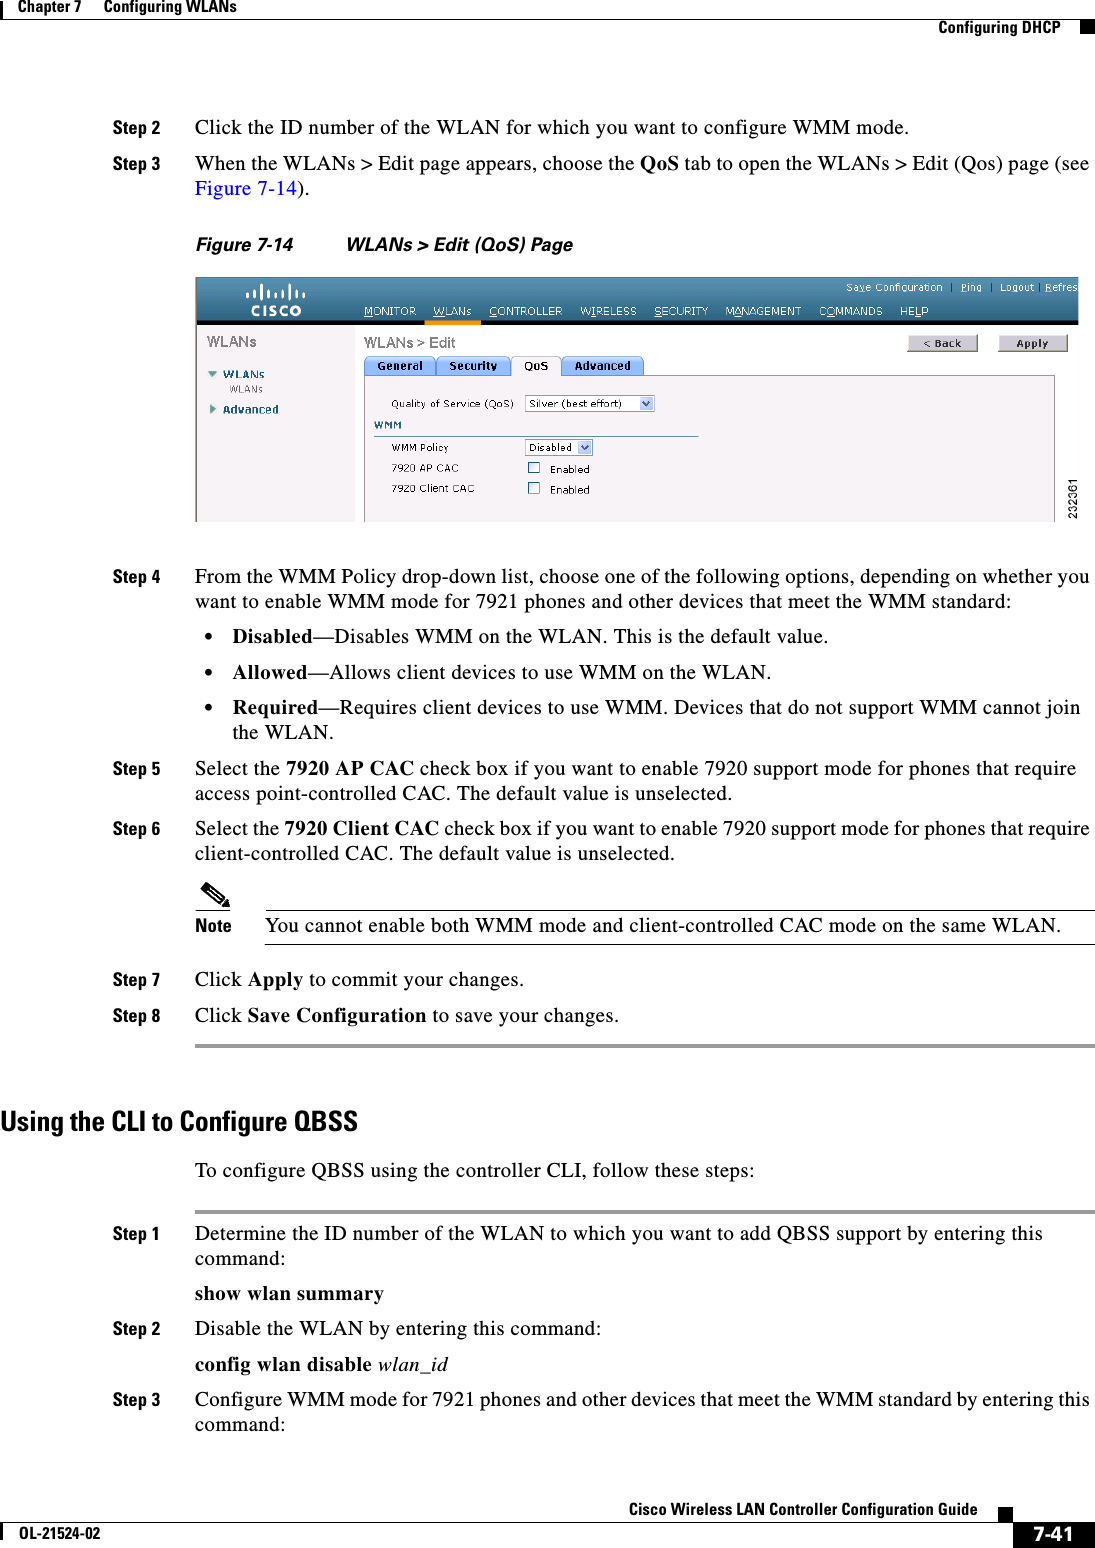  7-41Cisco Wireless LAN Controller Configuration GuideOL-21524-02Chapter 7      Configuring WLANs  Configuring DHCPStep 2 Click the ID number of the WLAN for which you want to configure WMM mode.Step 3 When the WLANs &gt; Edit page appears, choose the QoS tab to open the WLANs &gt; Edit (Qos) page (see Figure 7-14).Figure 7-14 WLANs &gt; Edit (QoS) PageStep 4 From the WMM Policy drop-down list, choose one of the following options, depending on whether you want to enable WMM mode for 7921 phones and other devices that meet the WMM standard:  • Disabled—Disables WMM on the WLAN. This is the default value.  • Allowed—Allows client devices to use WMM on the WLAN.   • Required—Requires client devices to use WMM. Devices that do not support WMM cannot join the WLAN.Step 5 Select the 7920 AP CAC check box if you want to enable 7920 support mode for phones that require access point-controlled CAC. The default value is unselected.Step 6 Select the 7920 Client CAC check box if you want to enable 7920 support mode for phones that require client-controlled CAC. The default value is unselected.Note You cannot enable both WMM mode and client-controlled CAC mode on the same WLAN.Step 7 Click Apply to commit your changes.Step 8 Click Save Configuration to save your changes.Using the CLI to Configure QBSSTo configure QBSS using the controller CLI, follow these steps:Step 1 Determine the ID number of the WLAN to which you want to add QBSS support by entering this command:show wlan summaryStep 2 Disable the WLAN by entering this command:config wlan disable wlan_idStep 3 Configure WMM mode for 7921 phones and other devices that meet the WMM standard by entering this command: